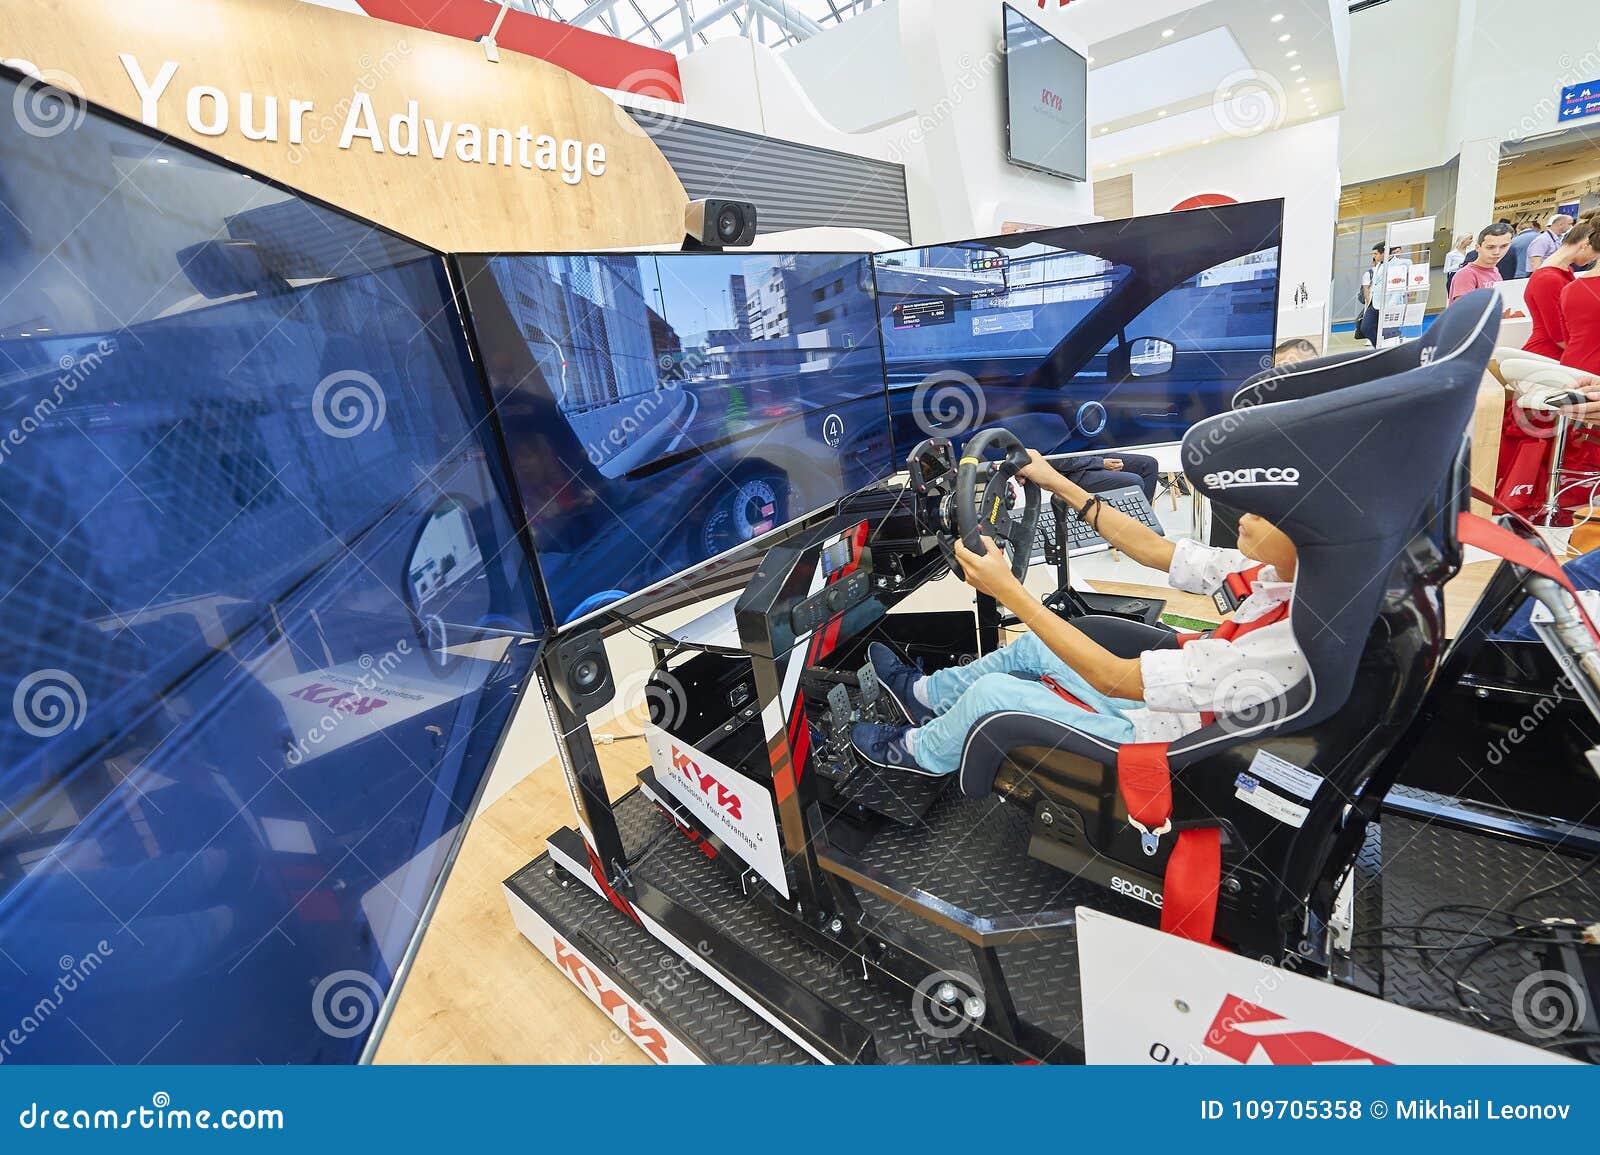 Moscow Aug 22 2017 View On Exhibition Stand With 3d Car